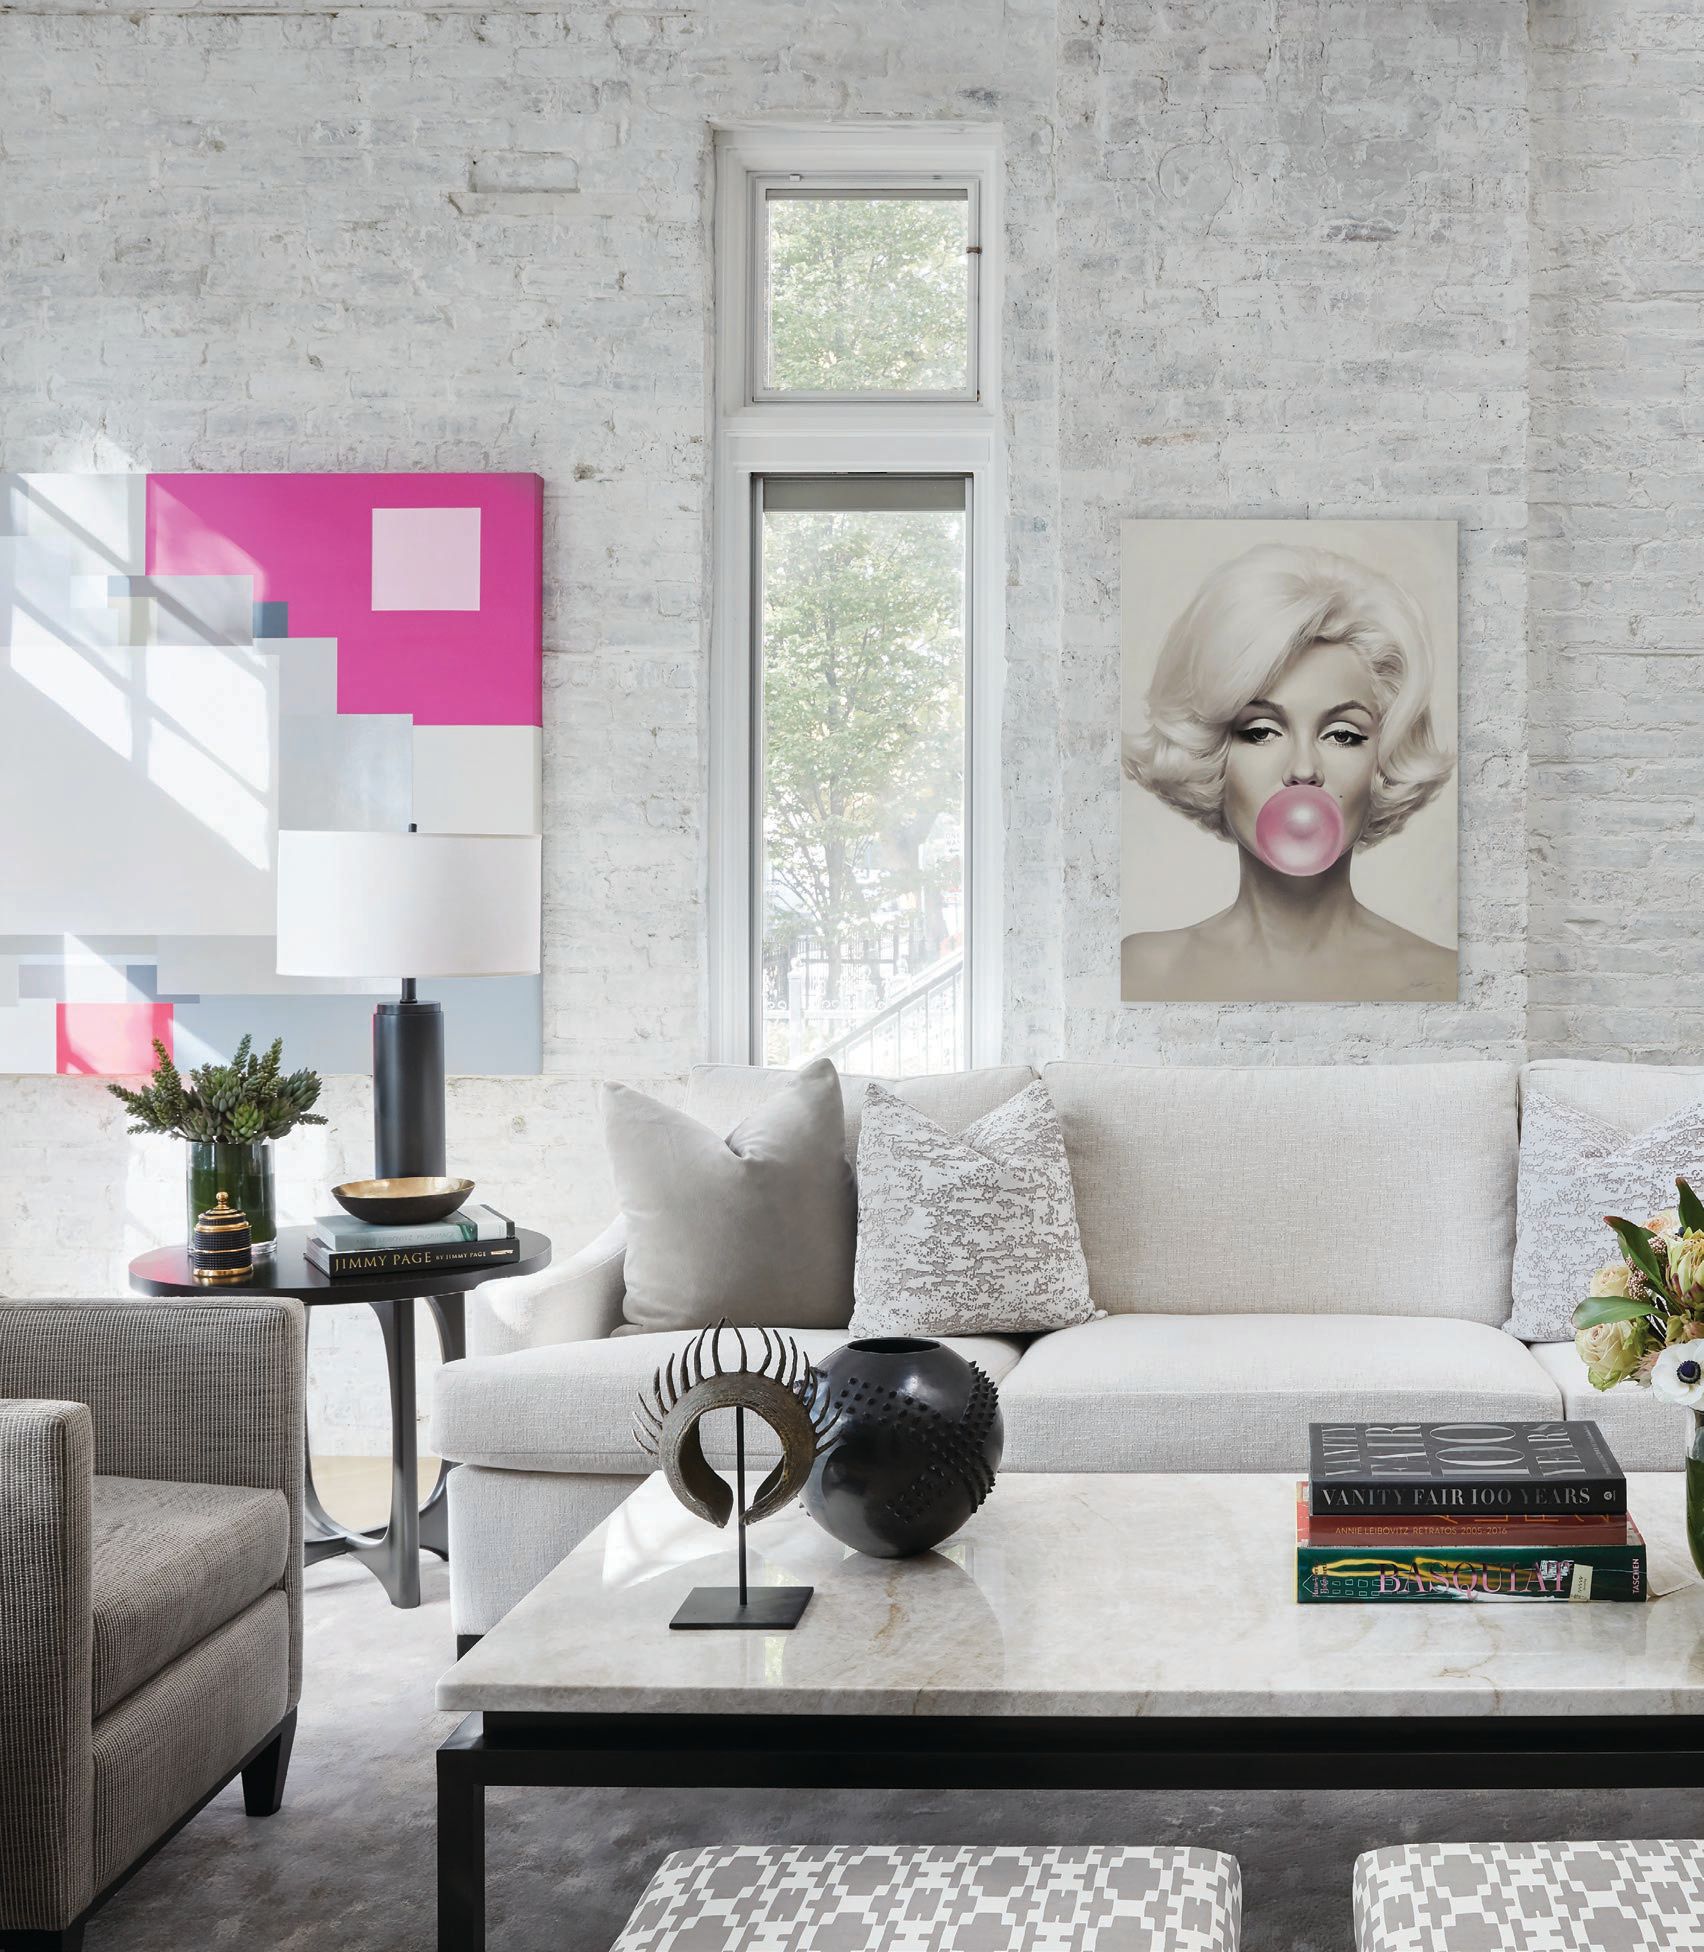 In the main living space (whose ceilings soar up to 30 feet), the works “Beverly Hills Woman” by Marco Casentini and “Marilyn Monroe Pink Bubble Gum” by Michael Moebius pop chicly against the room’s otherwise neutral tones. PHOTOGRAPHED BY DUSTIN HALLECK